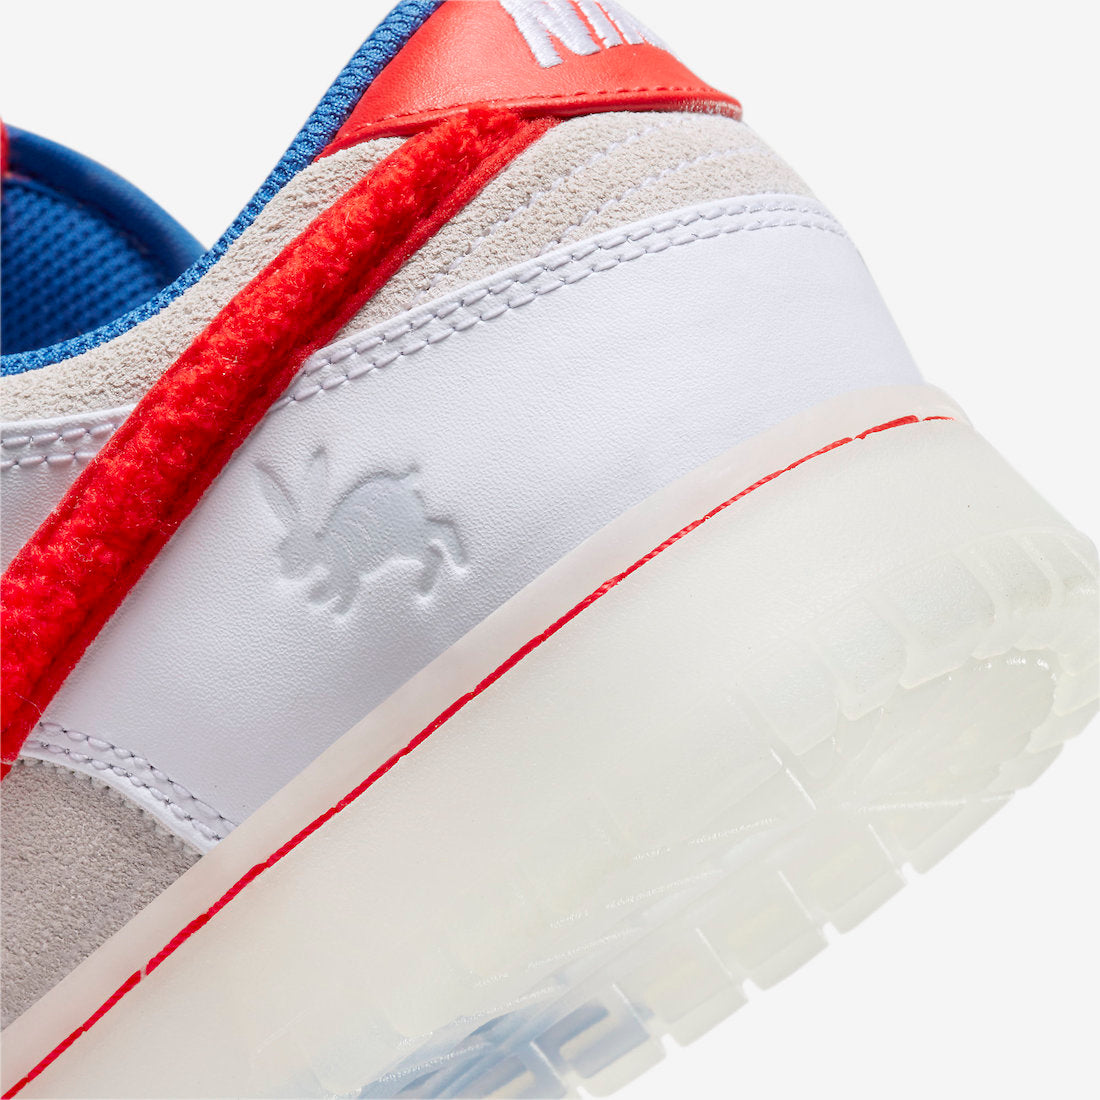 Nike Dunk Low “Year of the Rabbit – White Rabbit Candy”